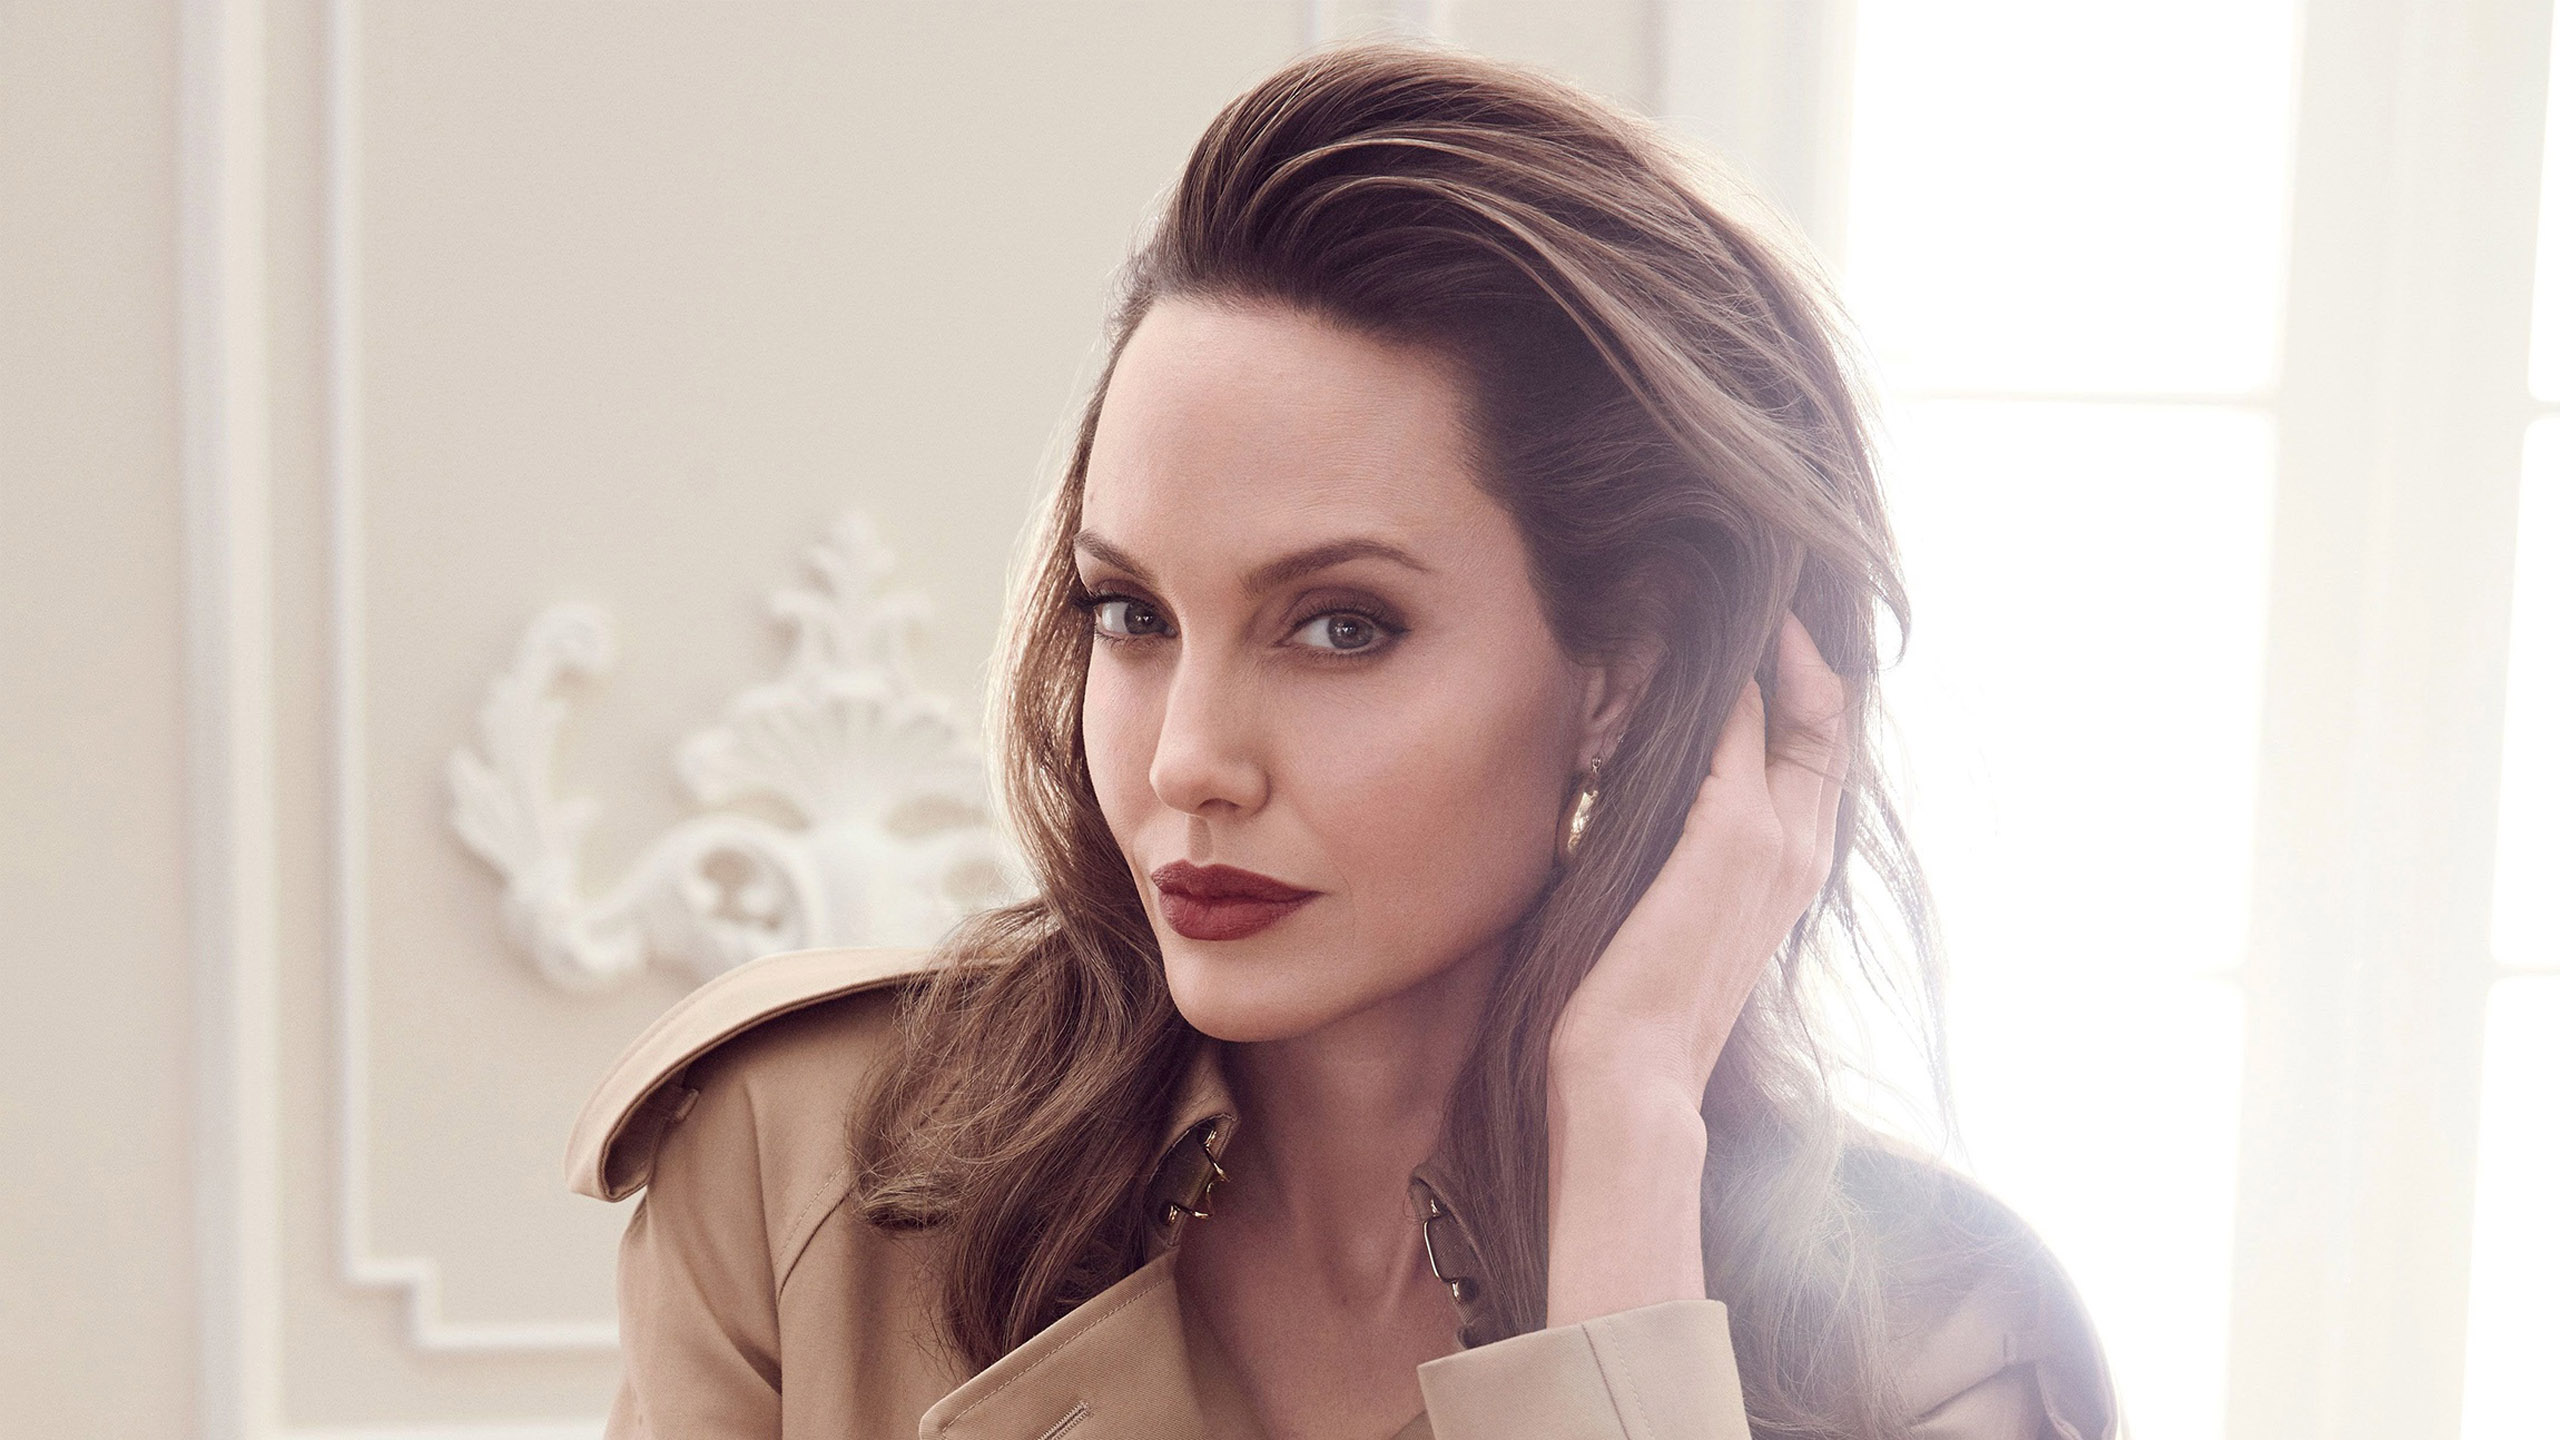 Angelina Jolie Is Posing For A Photo Wearing Brown Coat In White Wallpaper 2K Celebrities